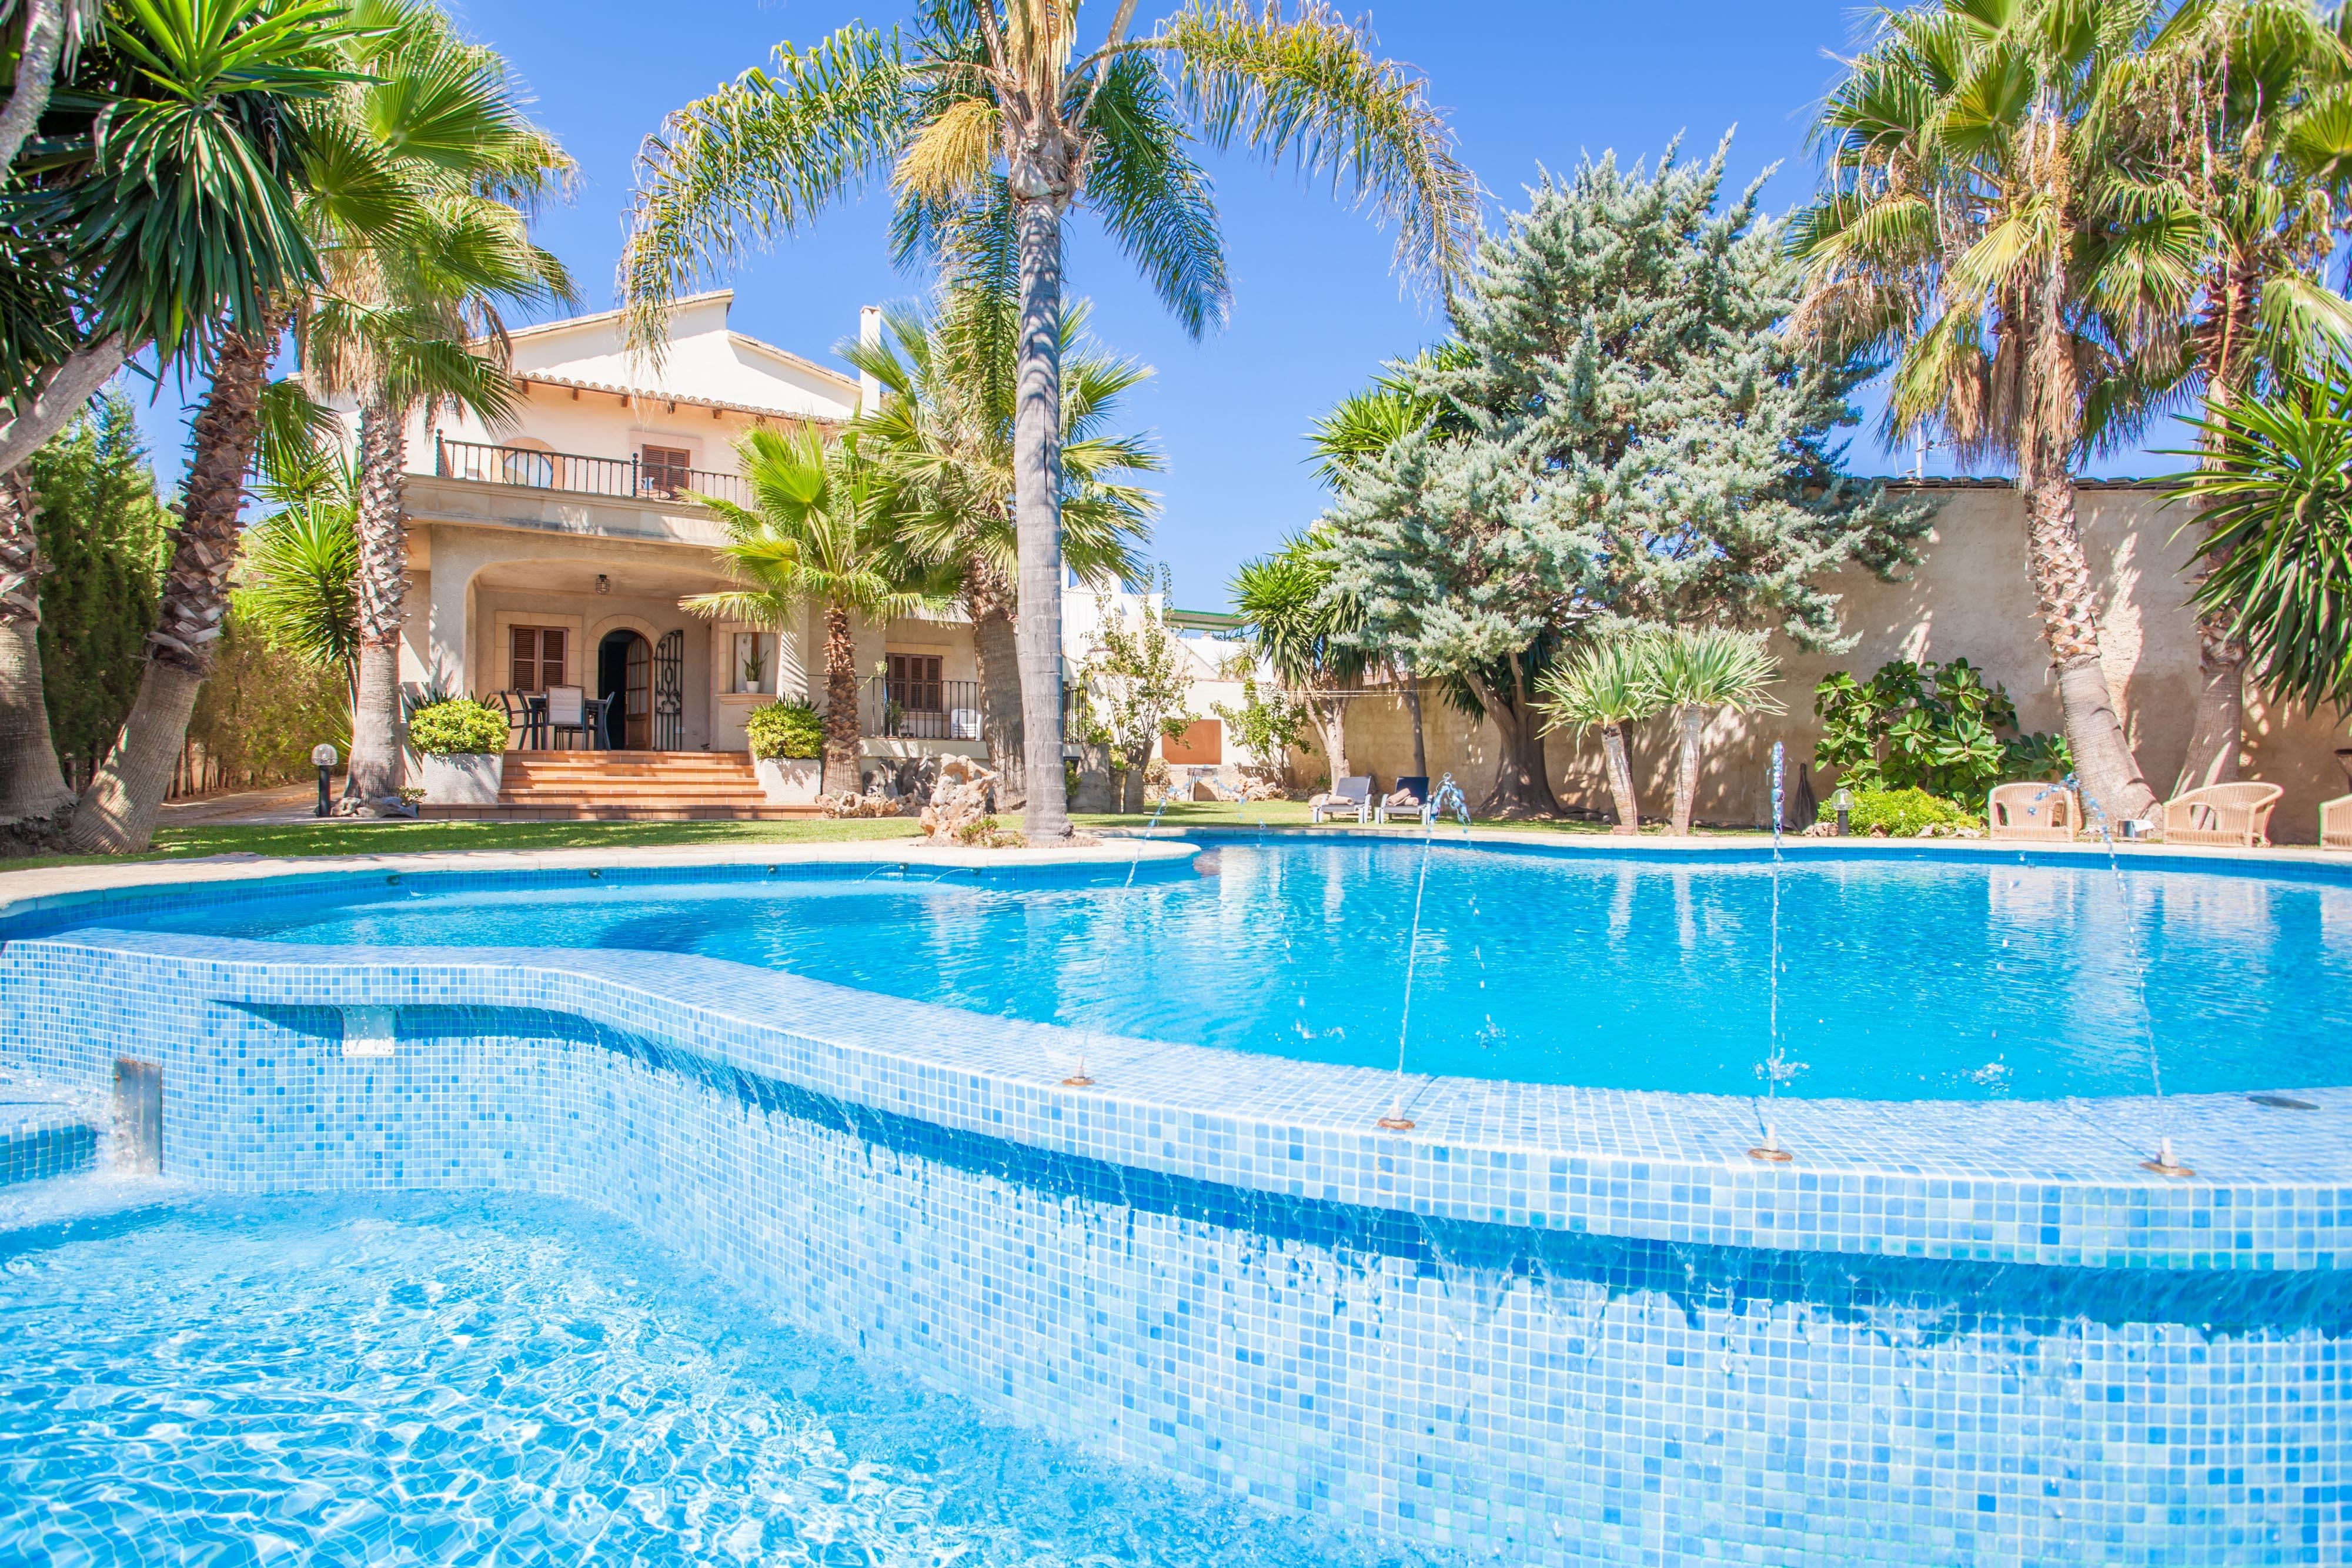 Property Image 1 - CAN GUAL - Wonderful villa with private pool in the center of the island. Free WiFi